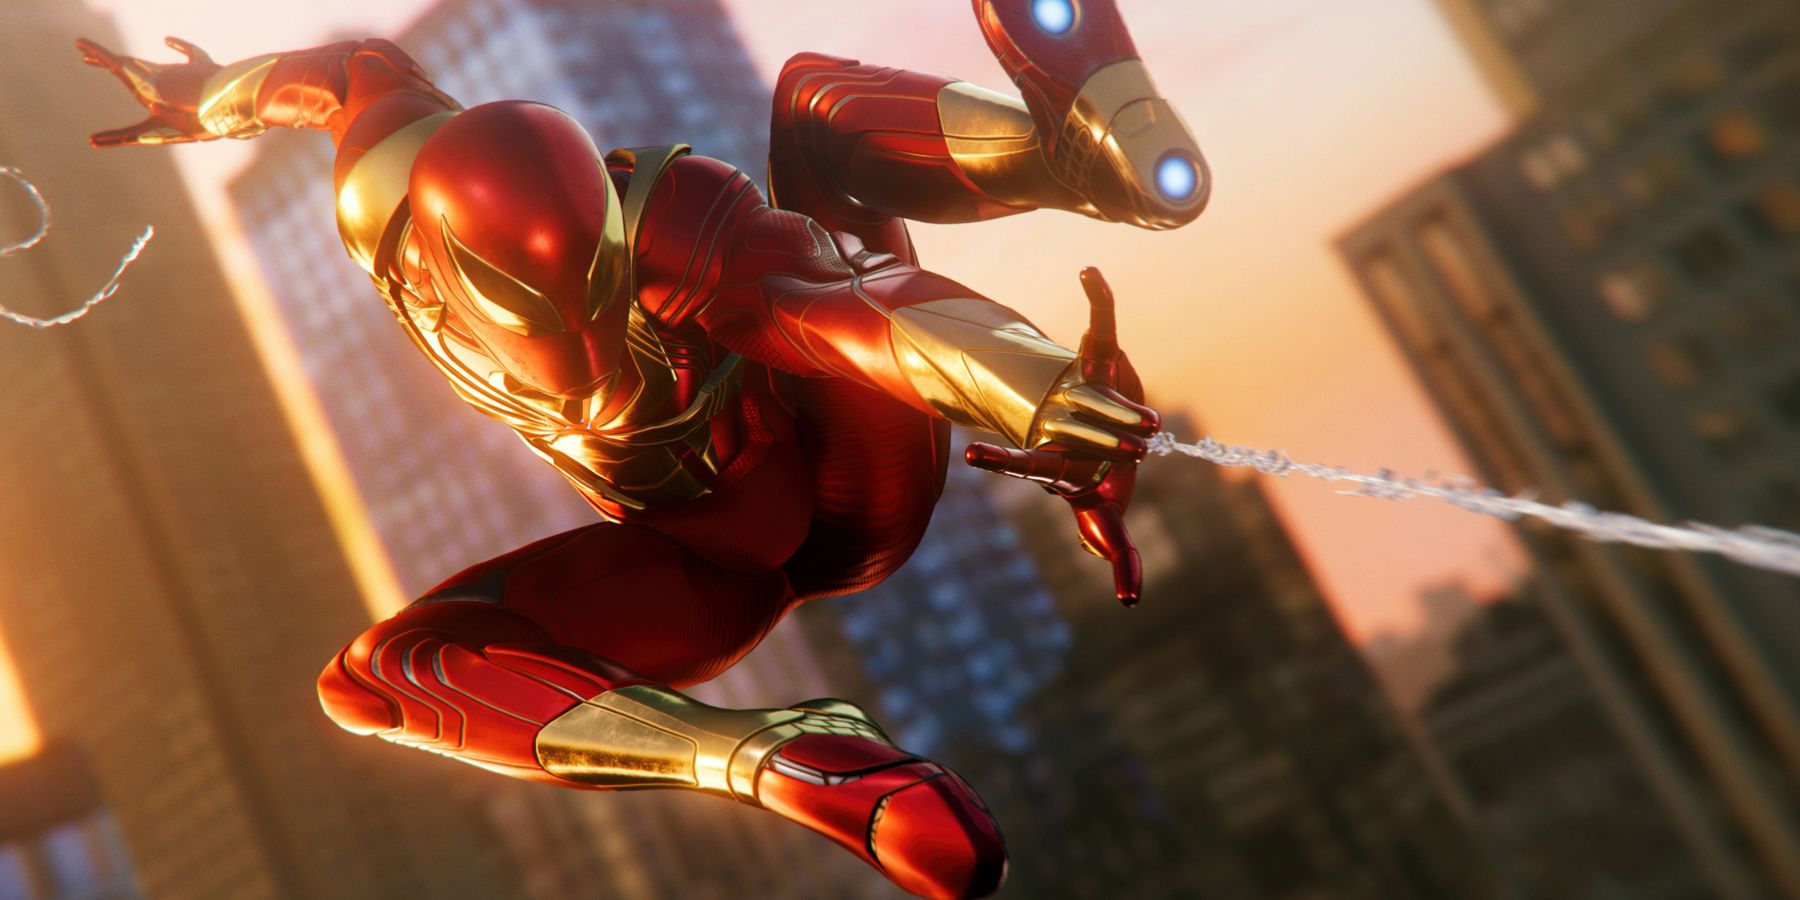 marvels spider-man spider-man no way home iron spider suits fan-made poster